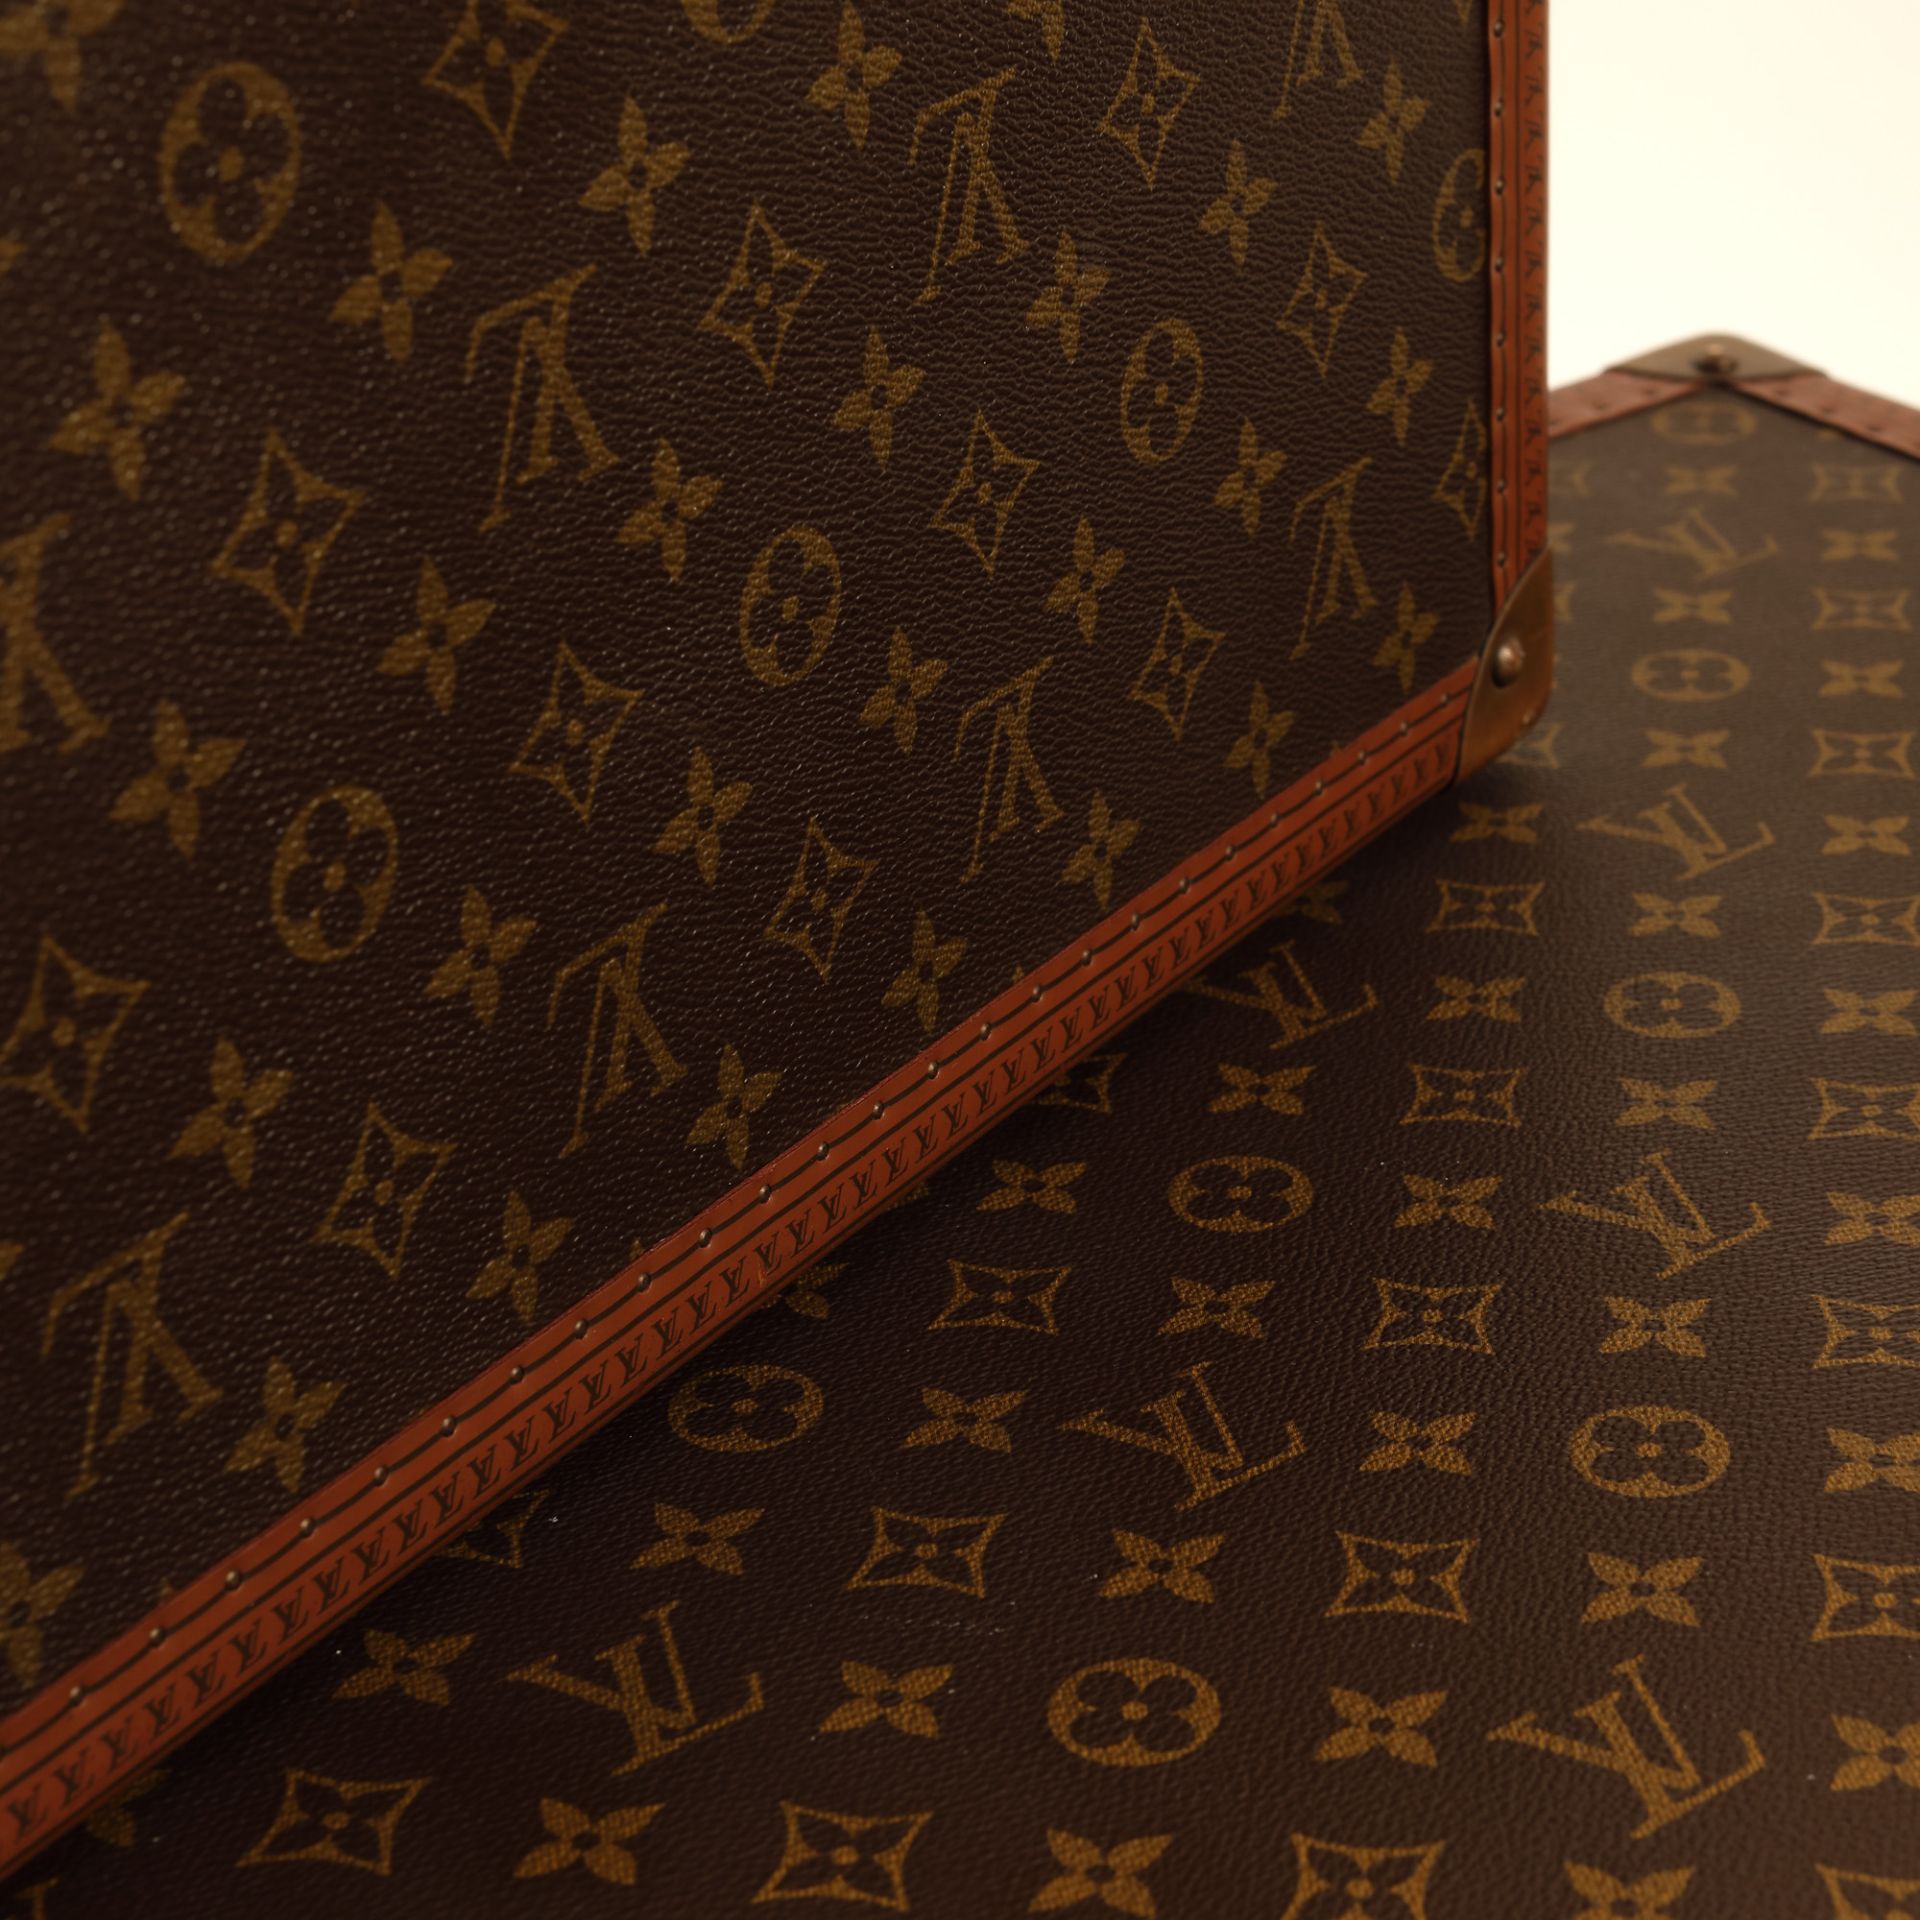 Pair of Louis Vuitton suitcases for travel - Image 8 of 8